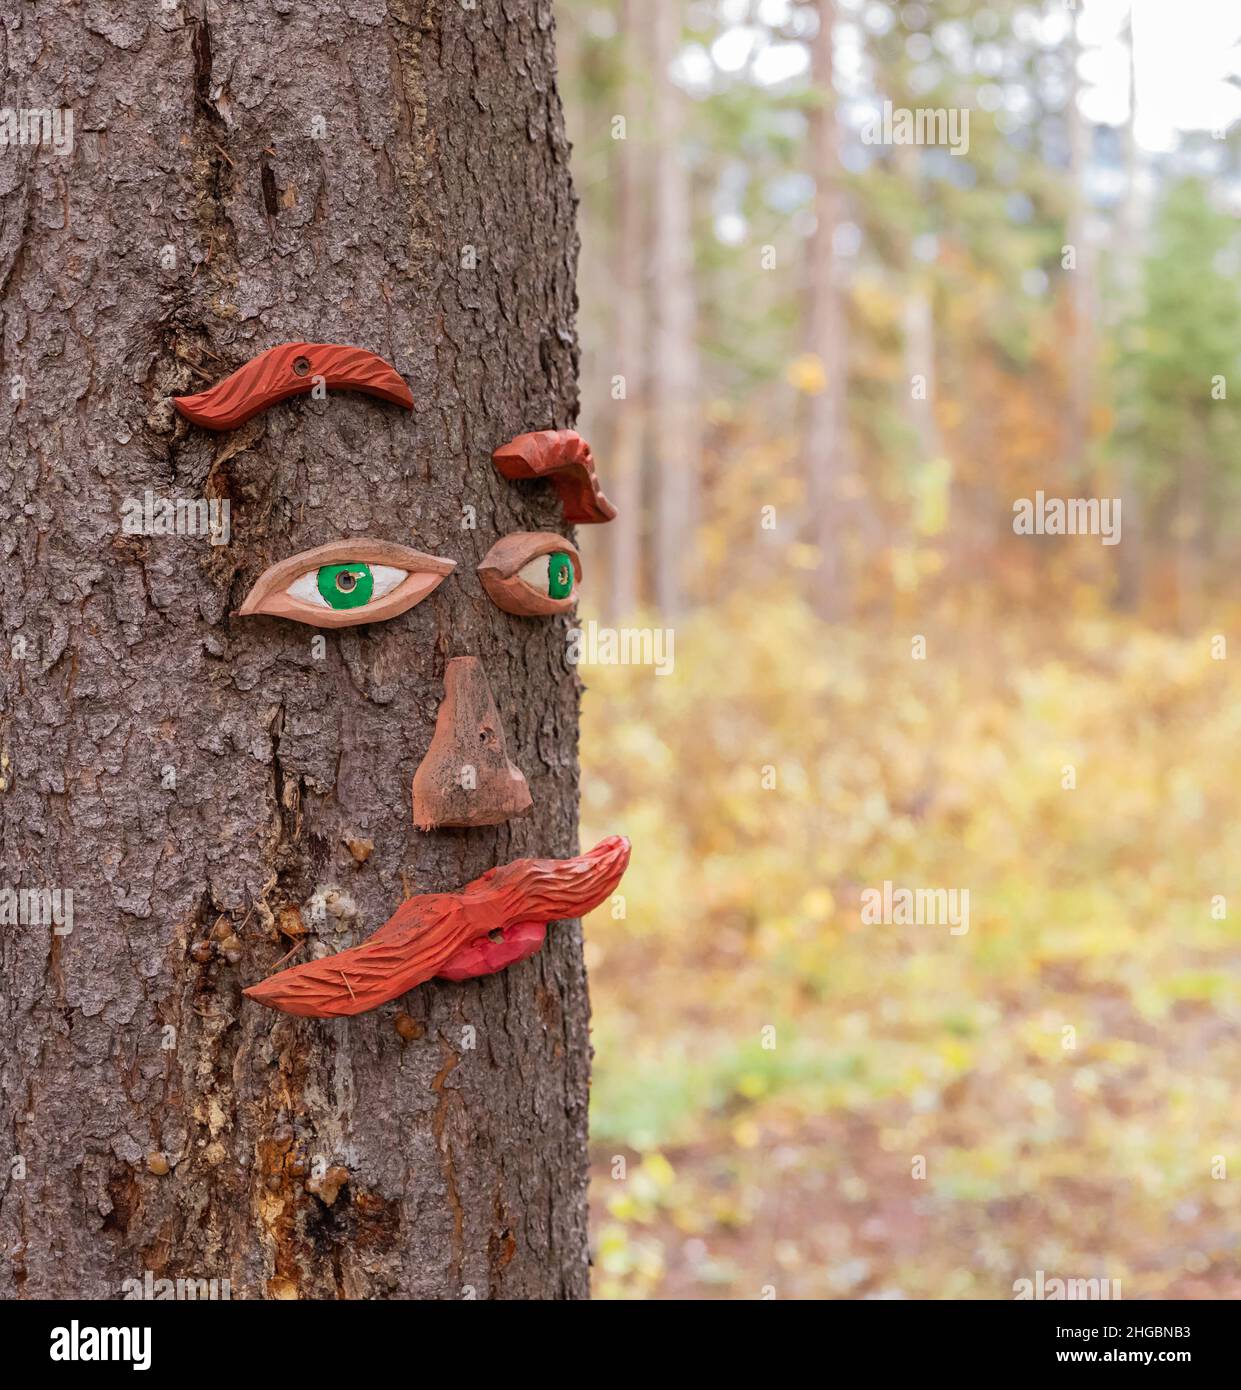 Wood carved tree with human face in a forest Stock Photo